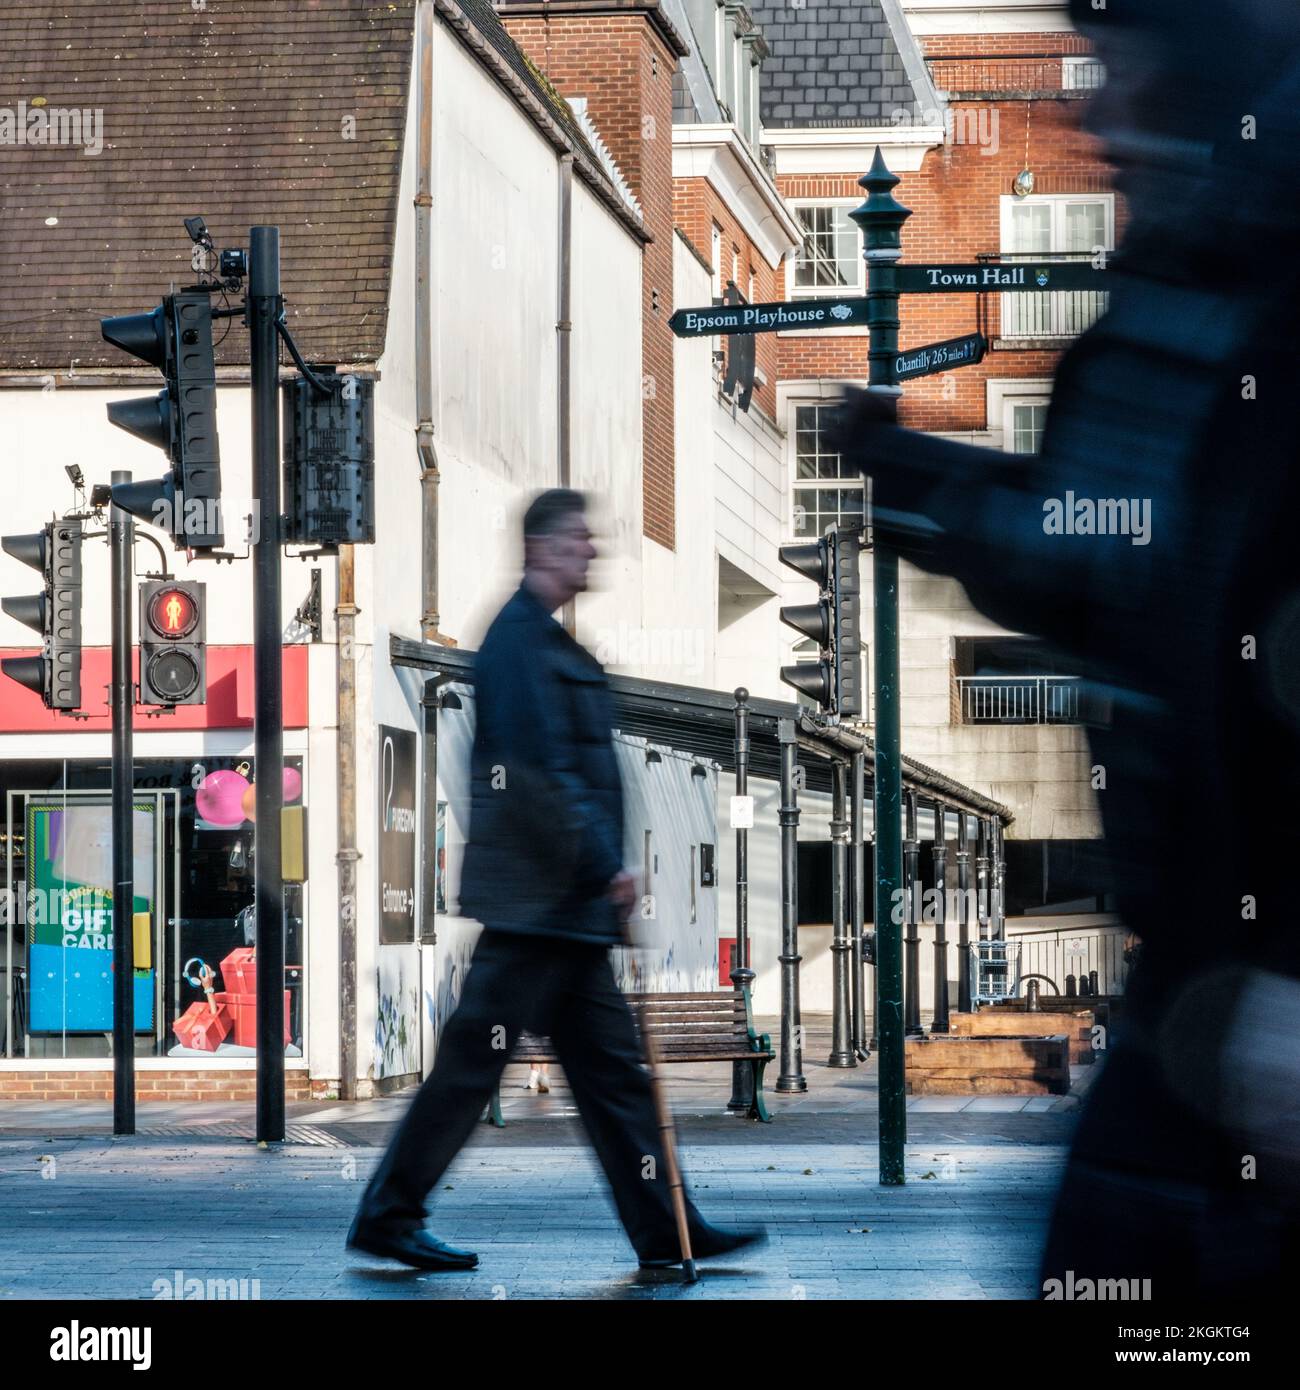 Epsom, Surrey, London UK, November 20 2022, Man Walking With A Walking Stick And Another Using A Mobile Phone Or Smart Phone On A Town Centre High Str Stock Photo